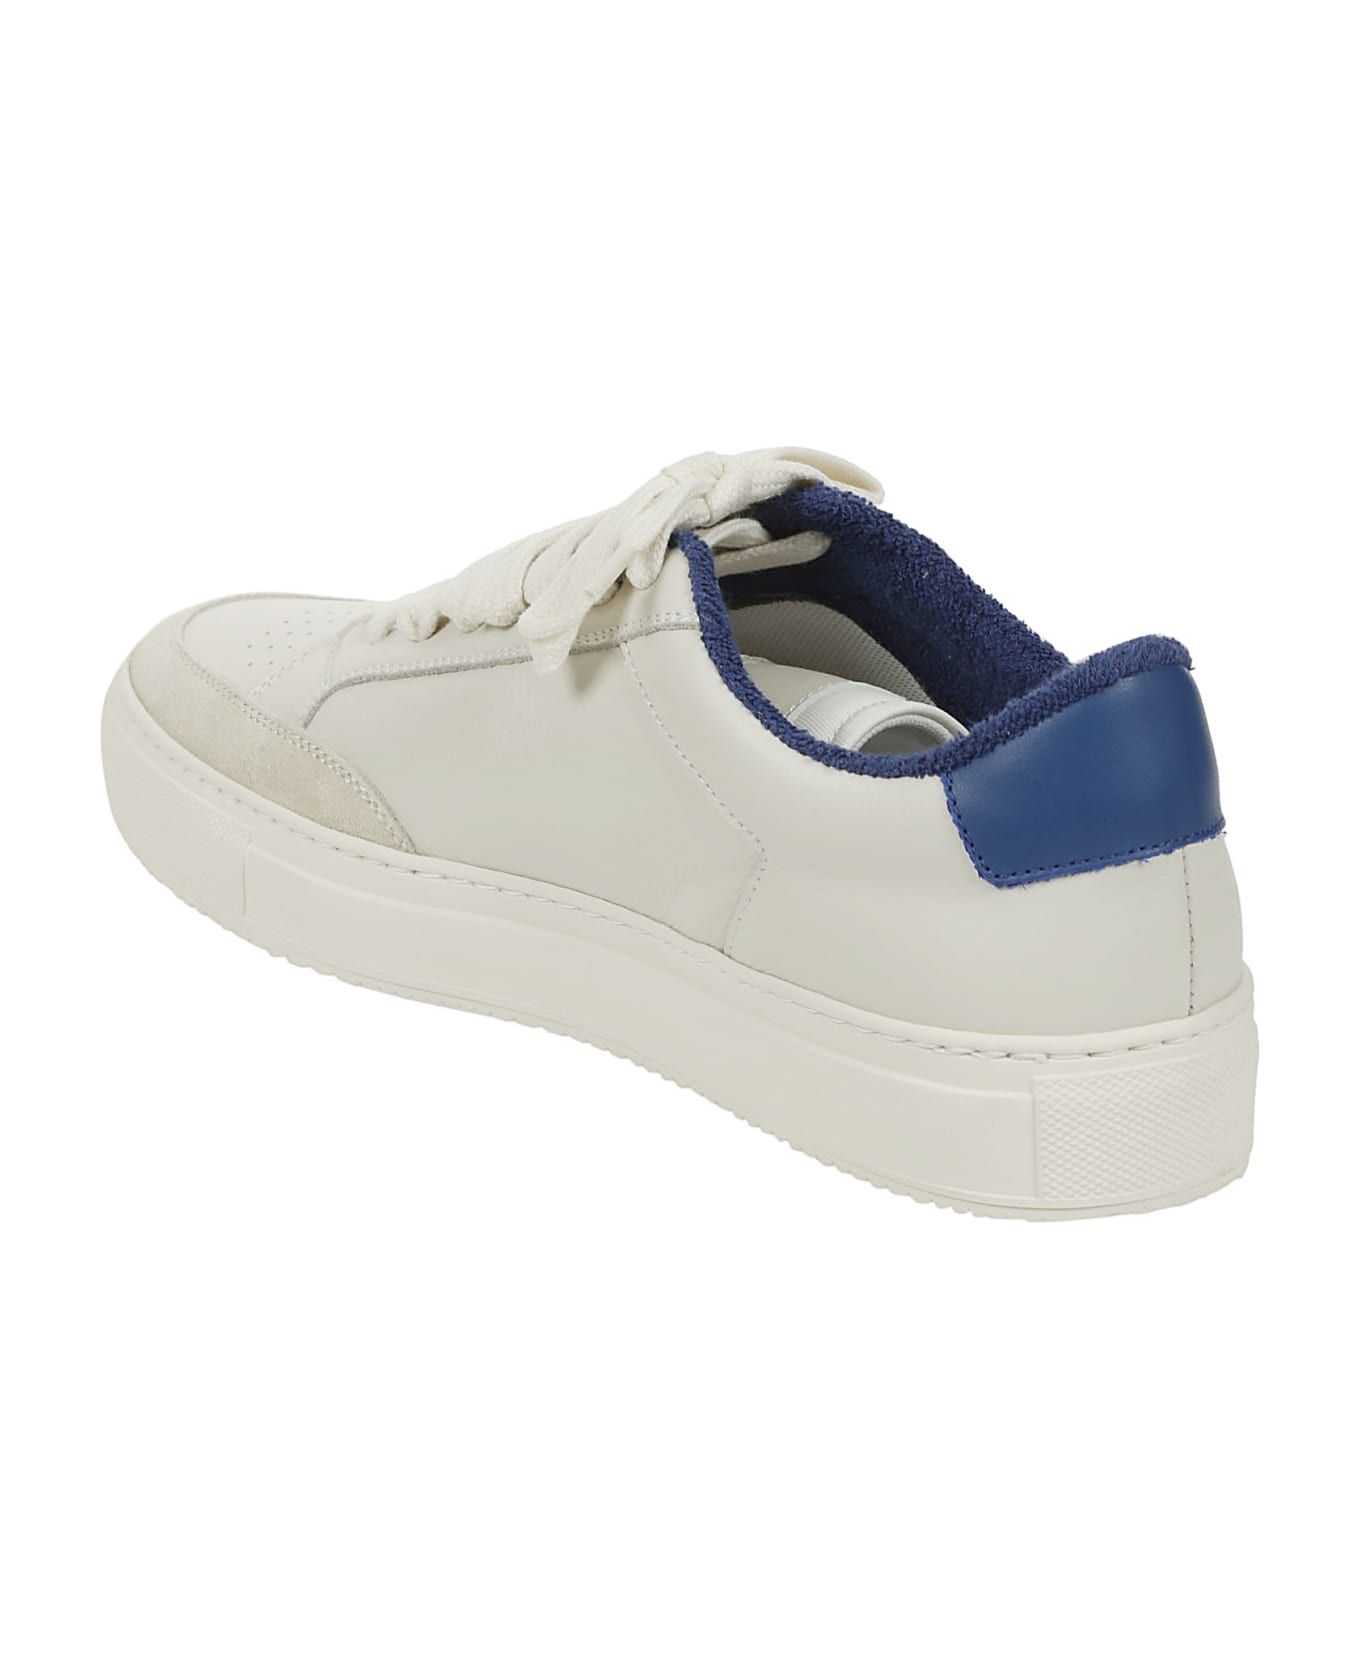 Common Projects Tennis Pro - Blue